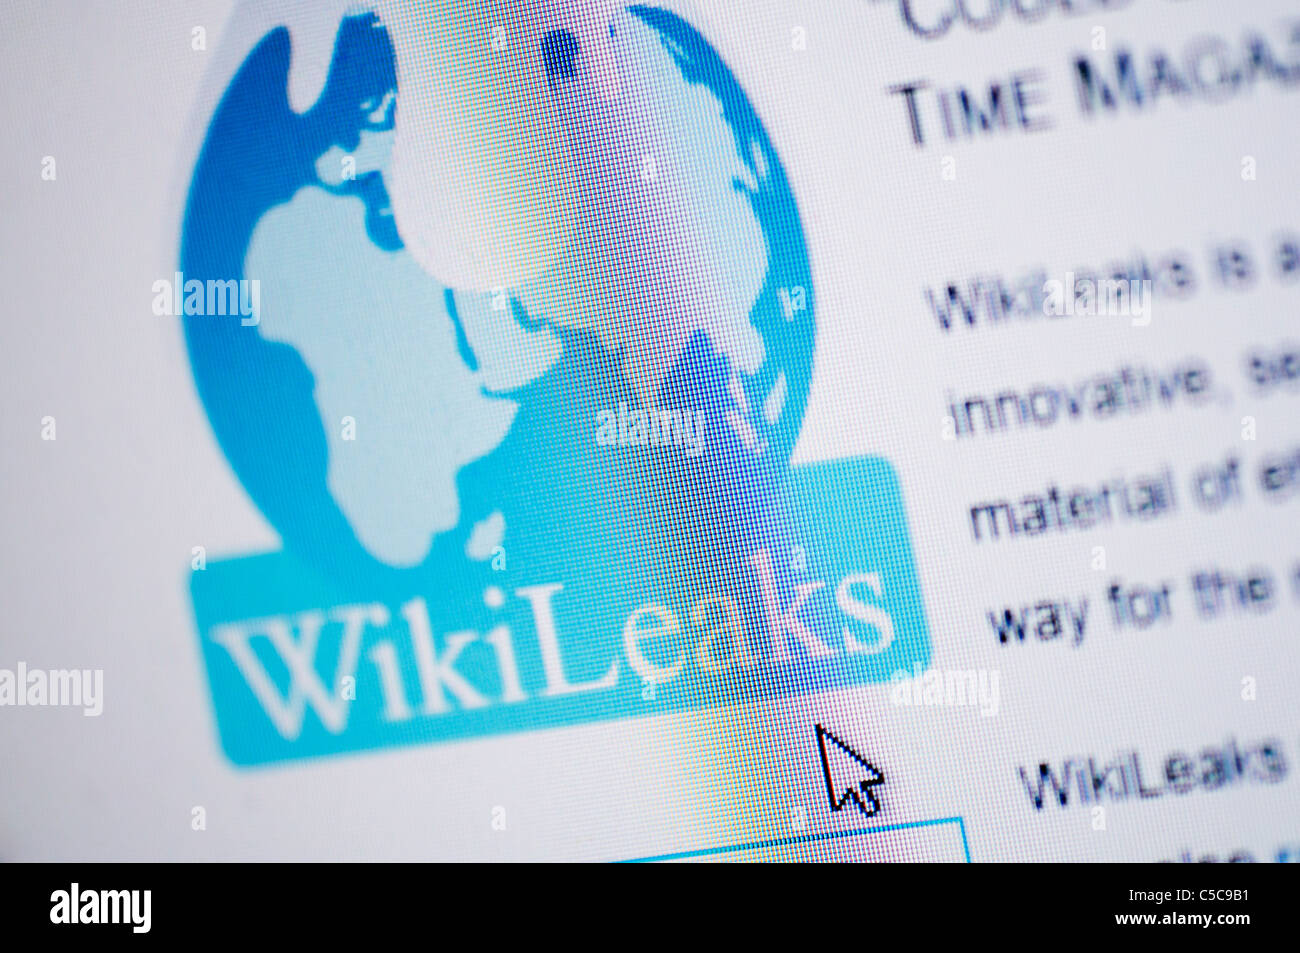 The Wikileaks website is displayed on a computer screen. Stock Photo